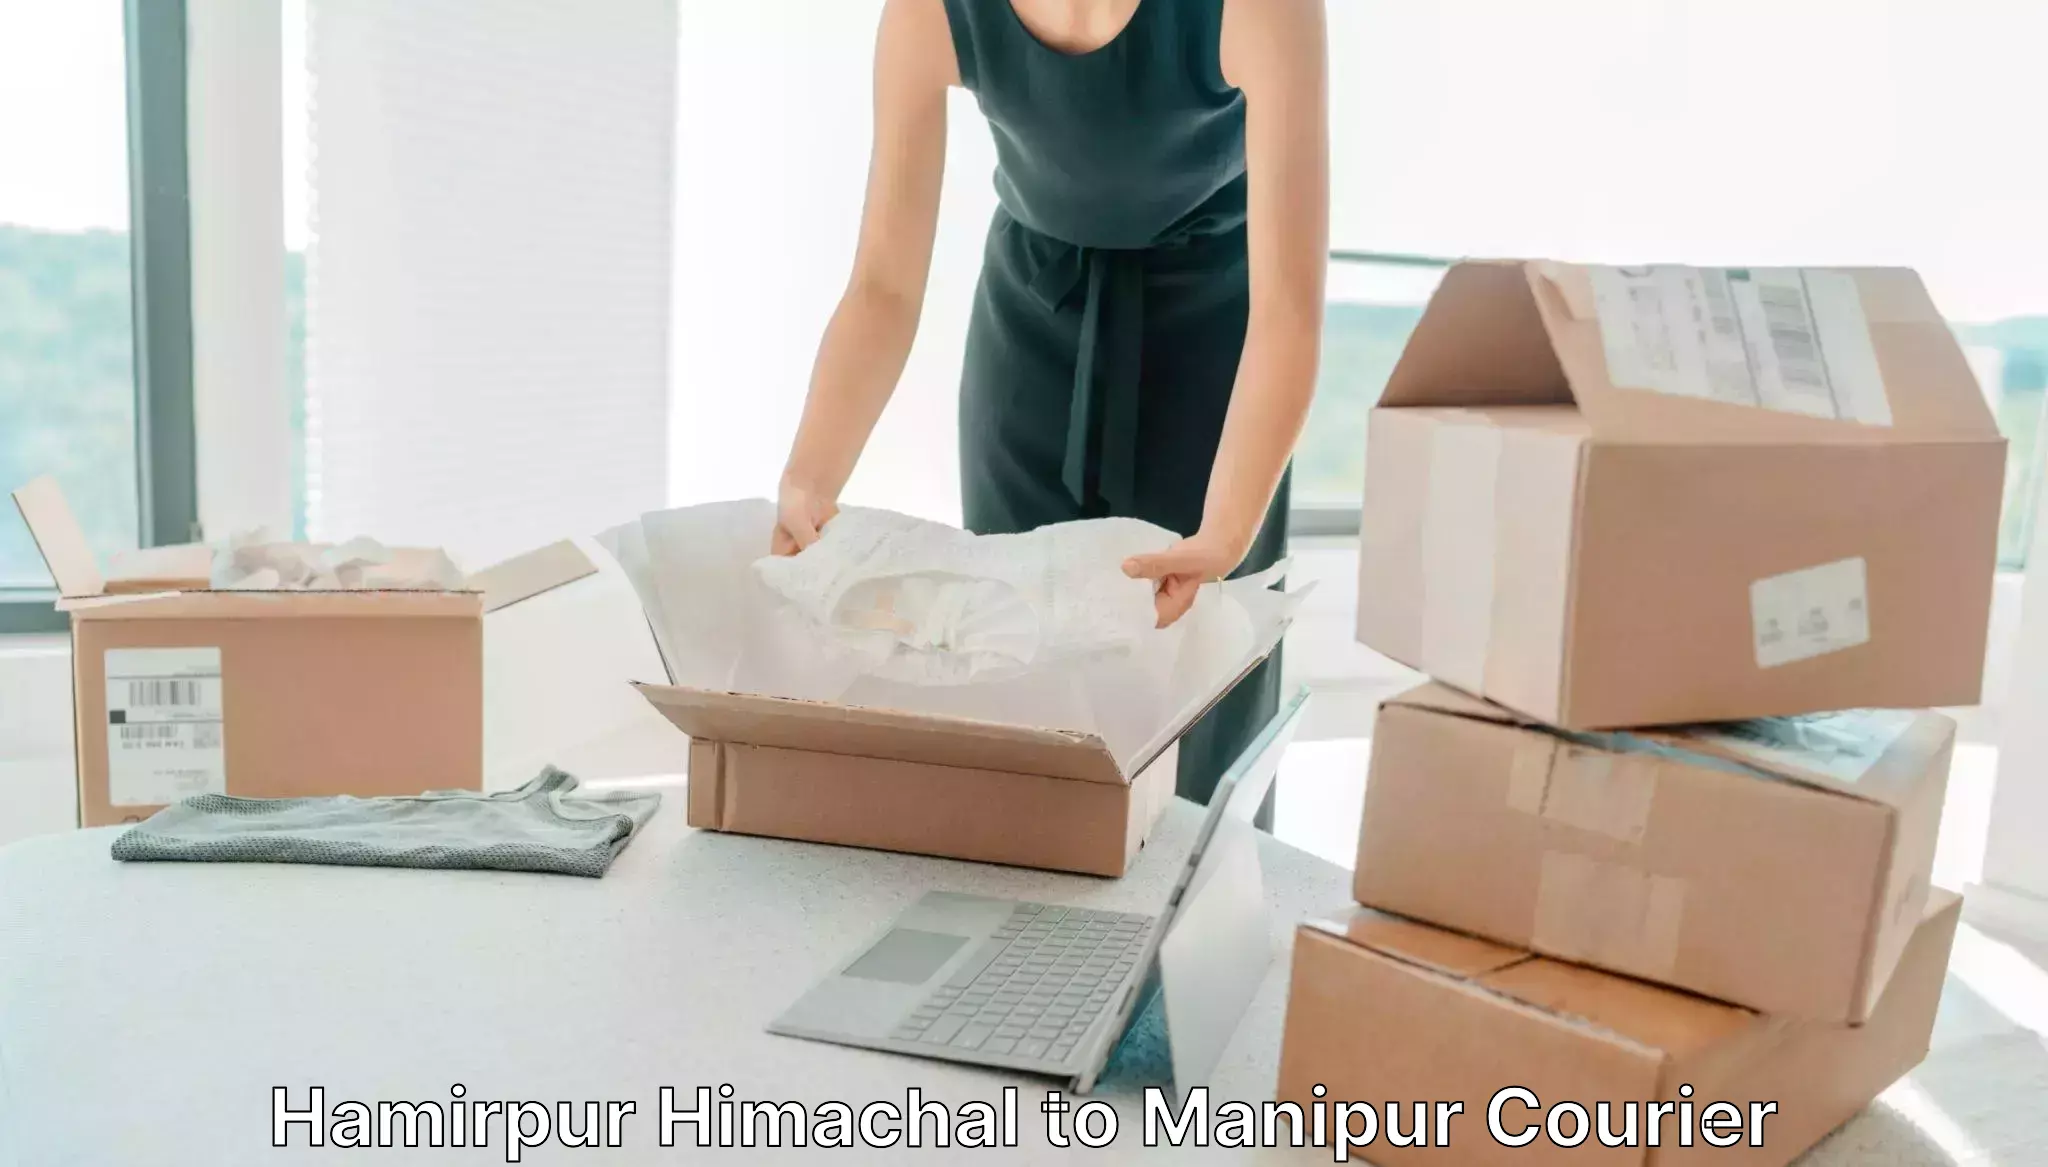 On-call courier service Hamirpur Himachal to Chandel